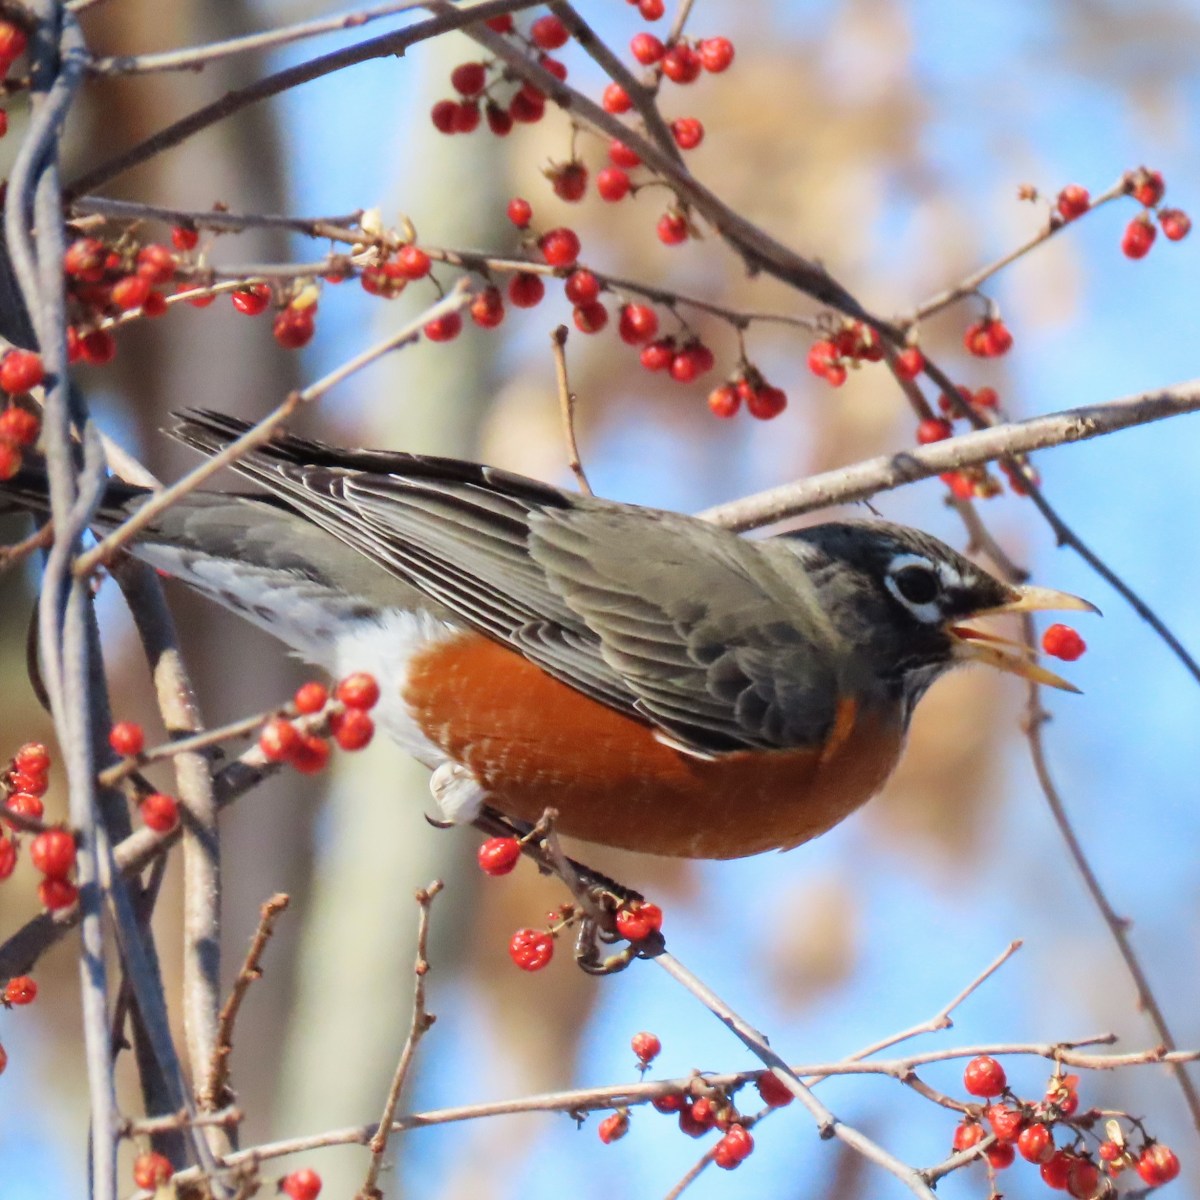 A Robin eats a red berry